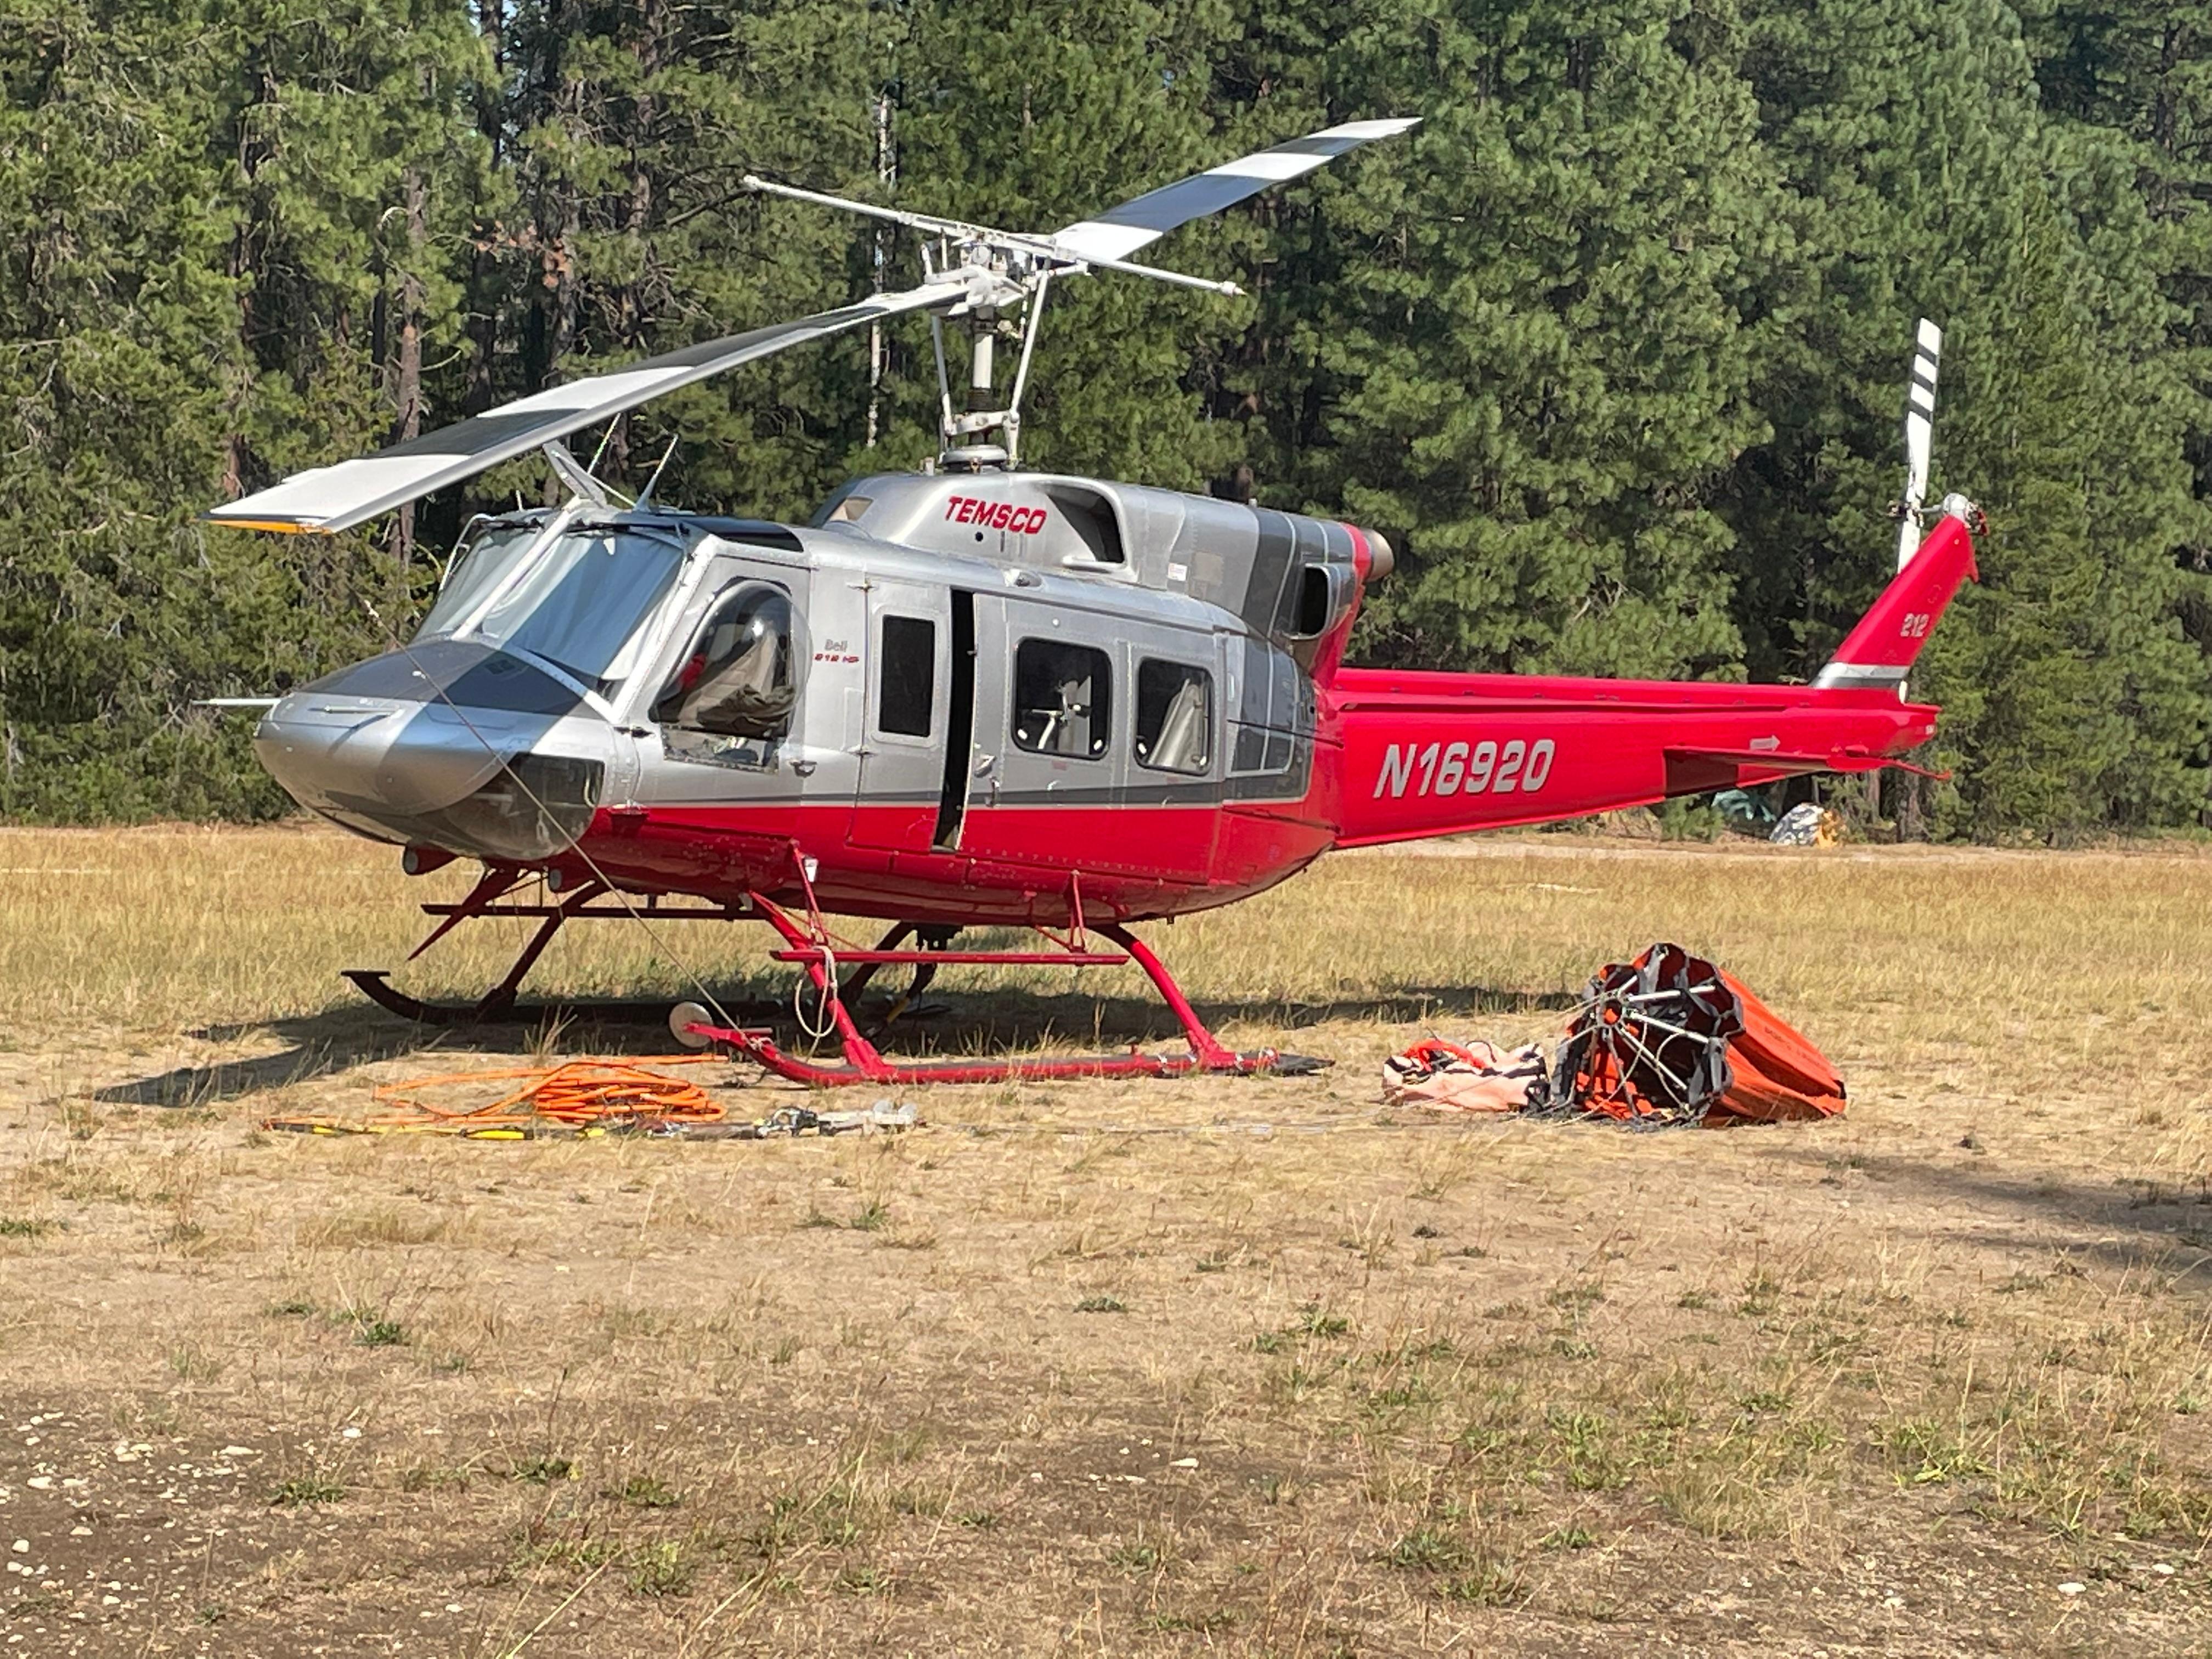 White River Fire Helicopter at Helibase, Sept 2, 2022